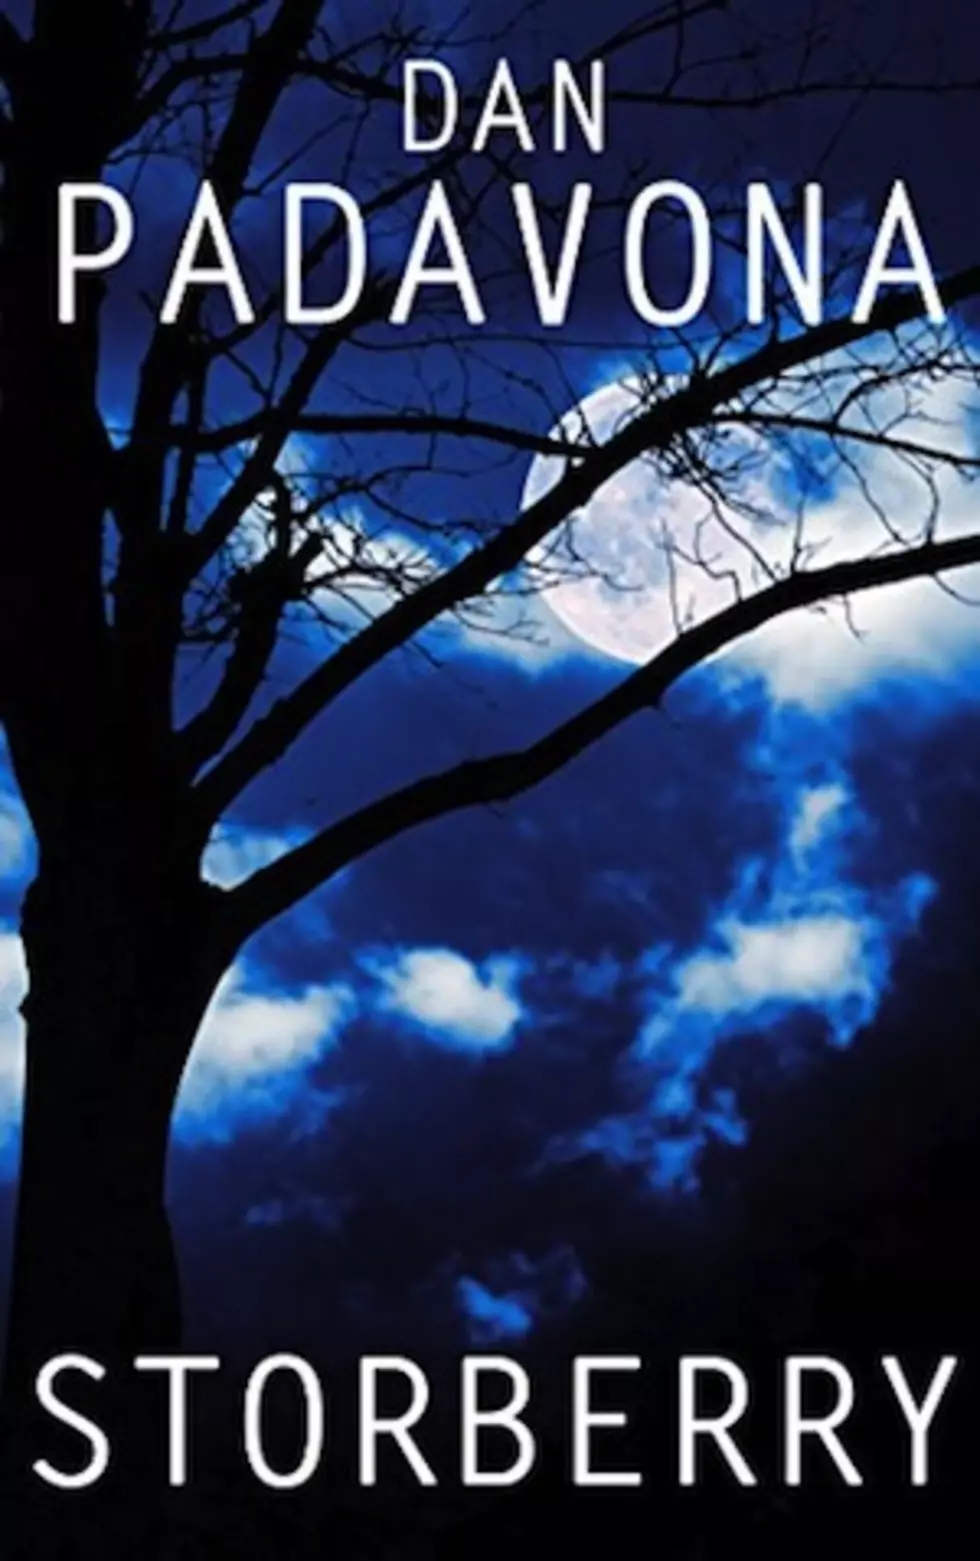 Ronnie James Dio&#8217;s Son Dan Padavona Releases Debut Horror Novel &#8216;Storberry&#8217;